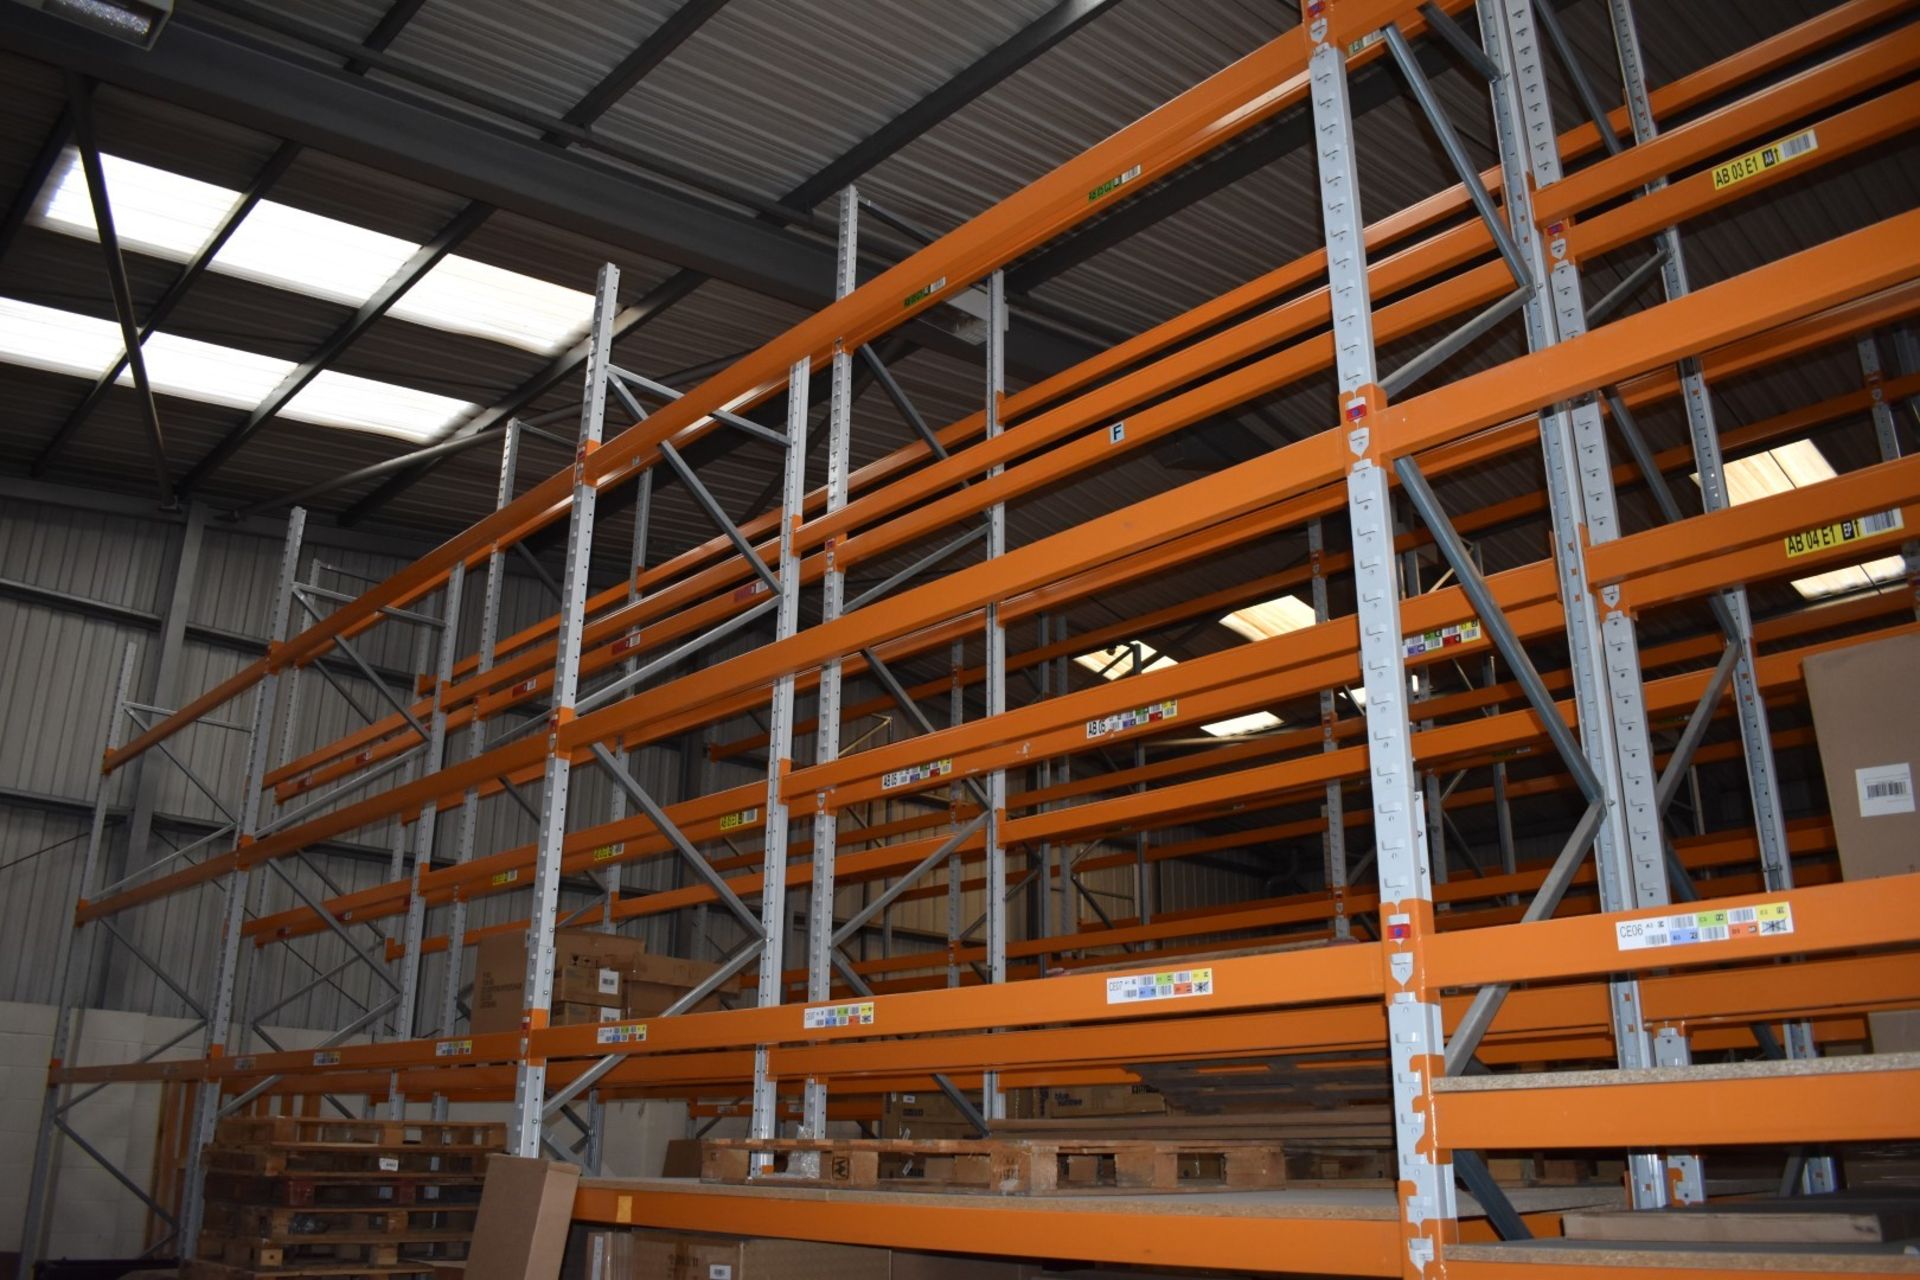 9 x Bays of Apex Pallet Racking - Includes 10 x Apex 16 UK 16,000kg Capacity Uprights and 60 x - Image 13 of 19